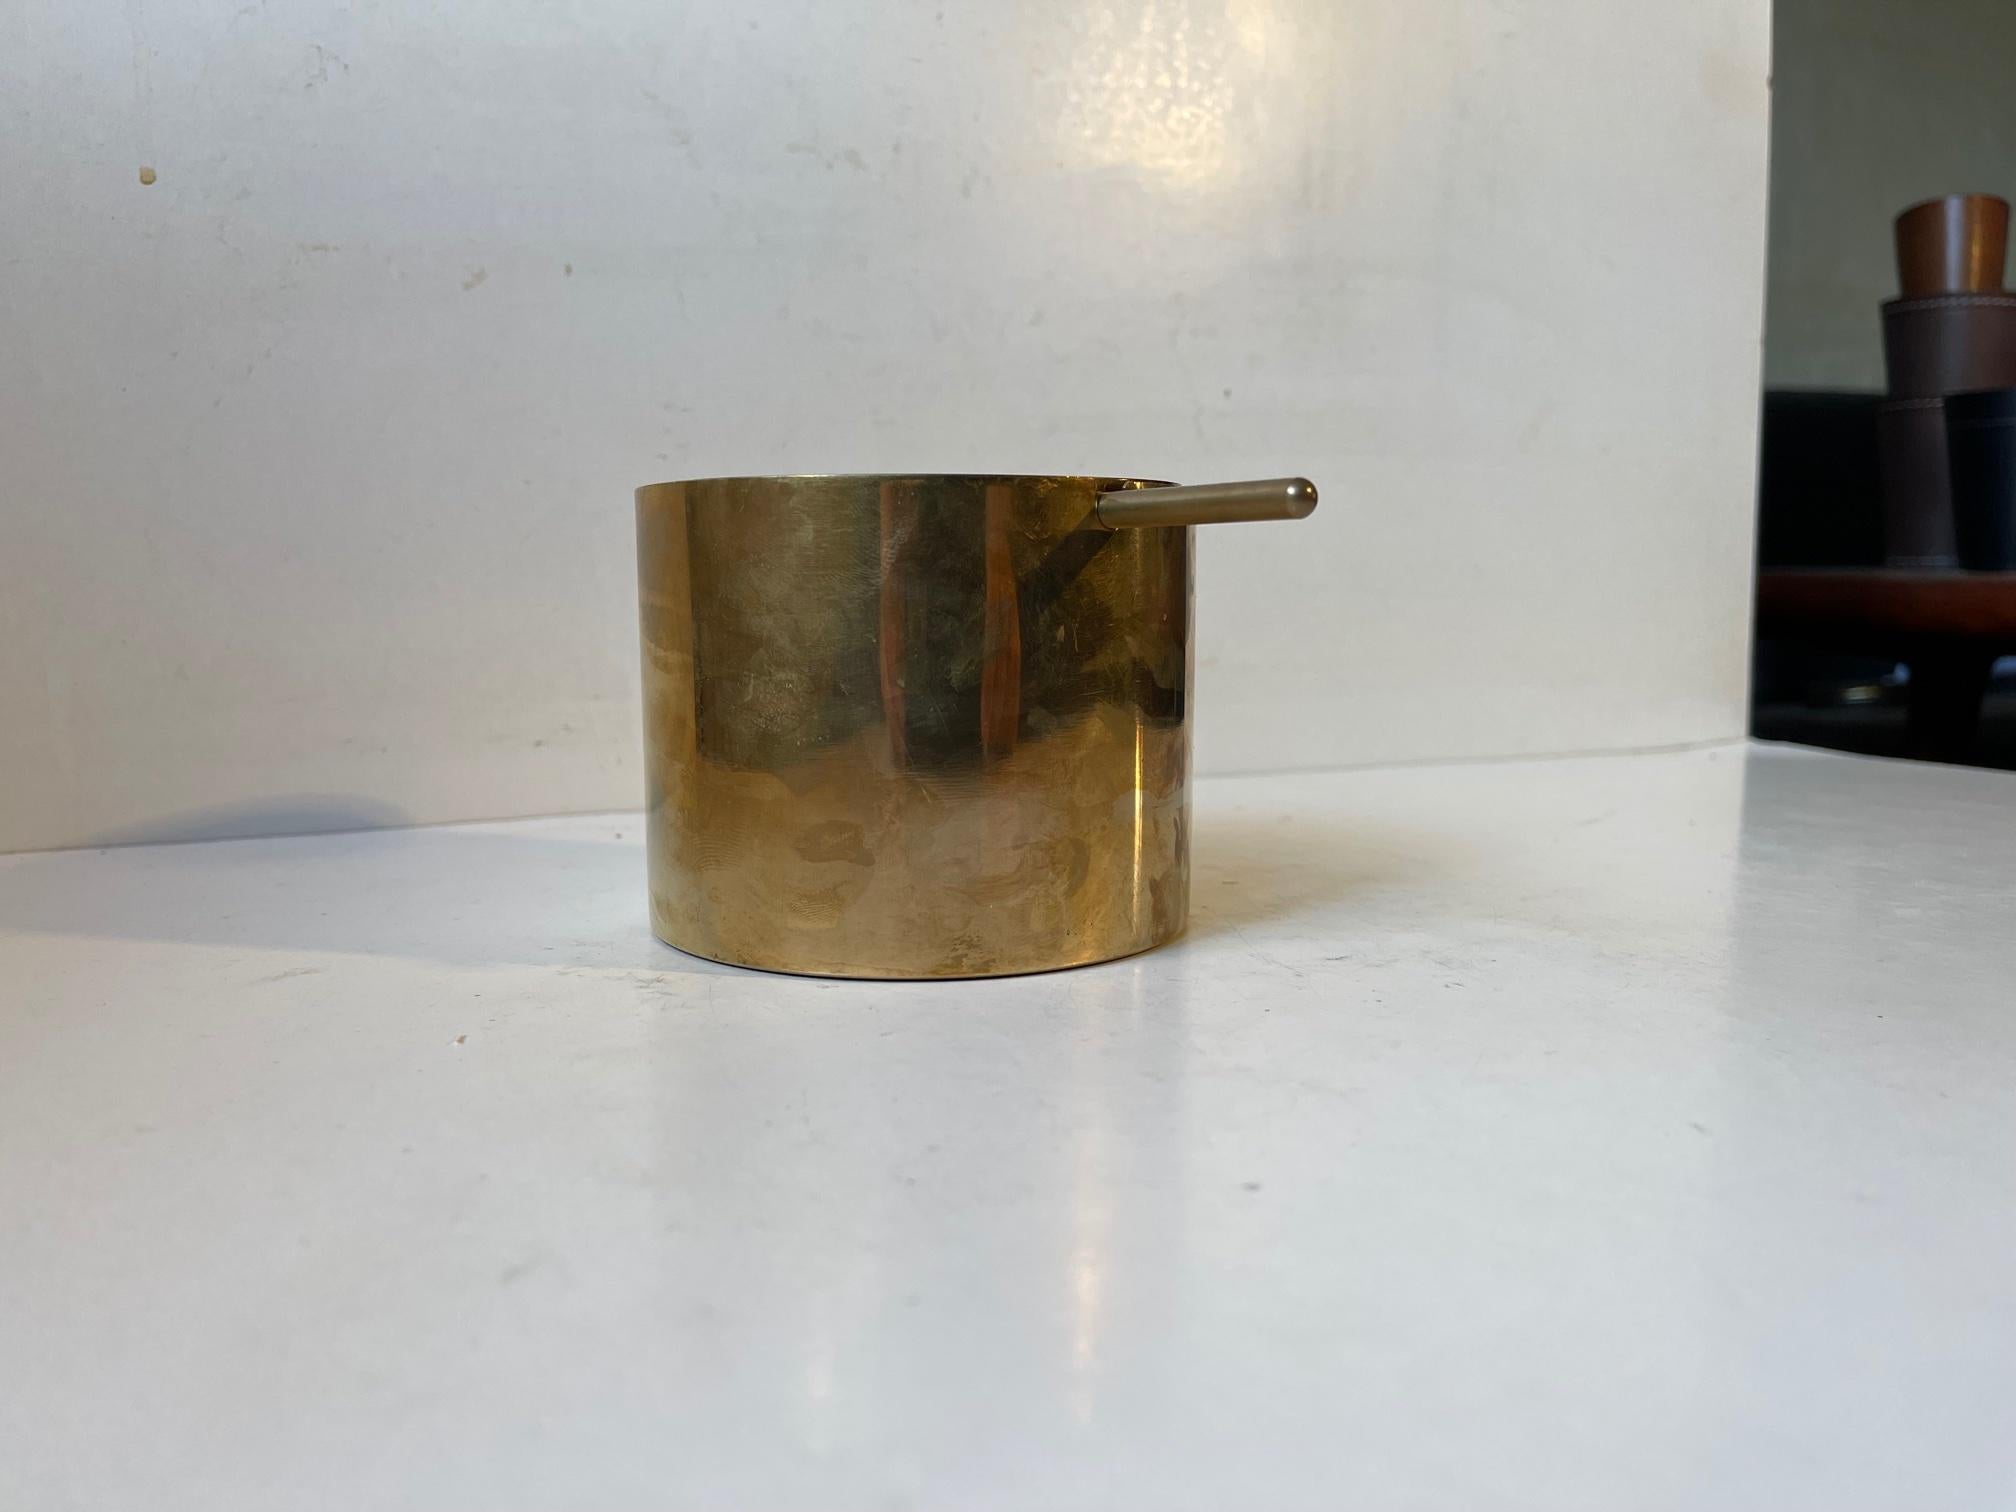 Large Brass Ashtray Cylinda-Line by Arne Jacobsen for Stelton, 1960s For Sale 2